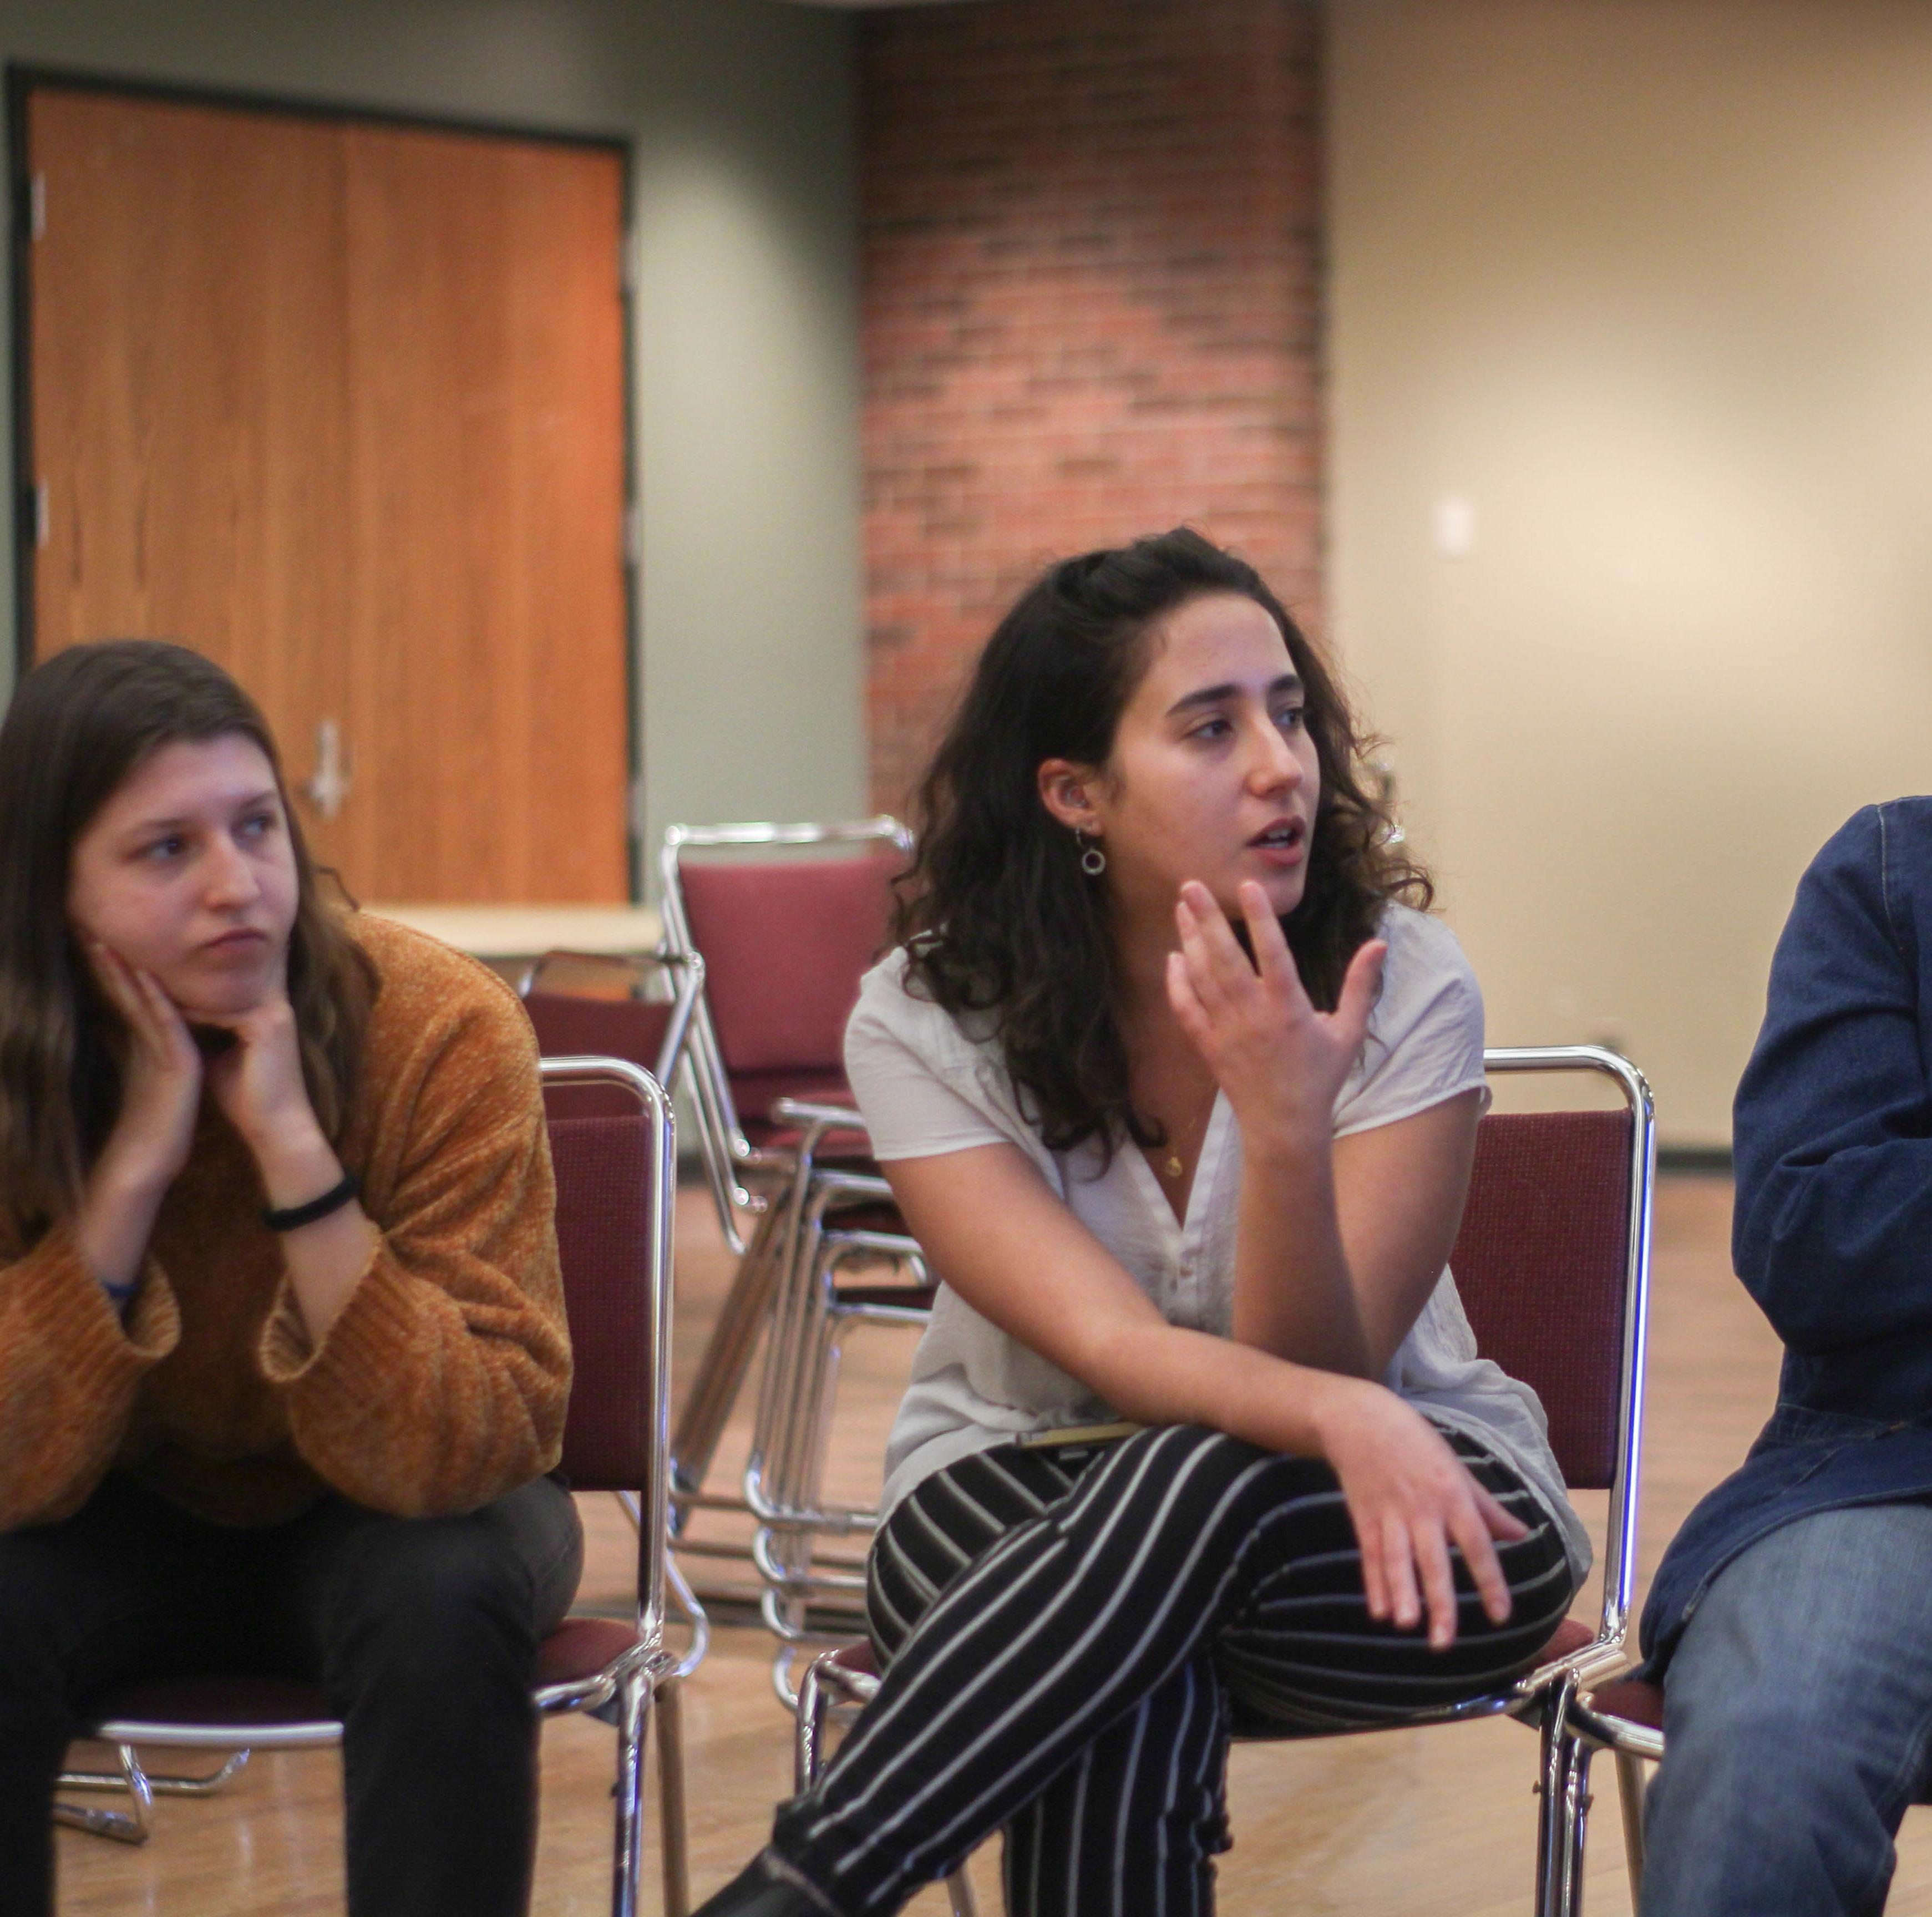 students sit in a discussion circle for a panel event called "Beyond Borders"